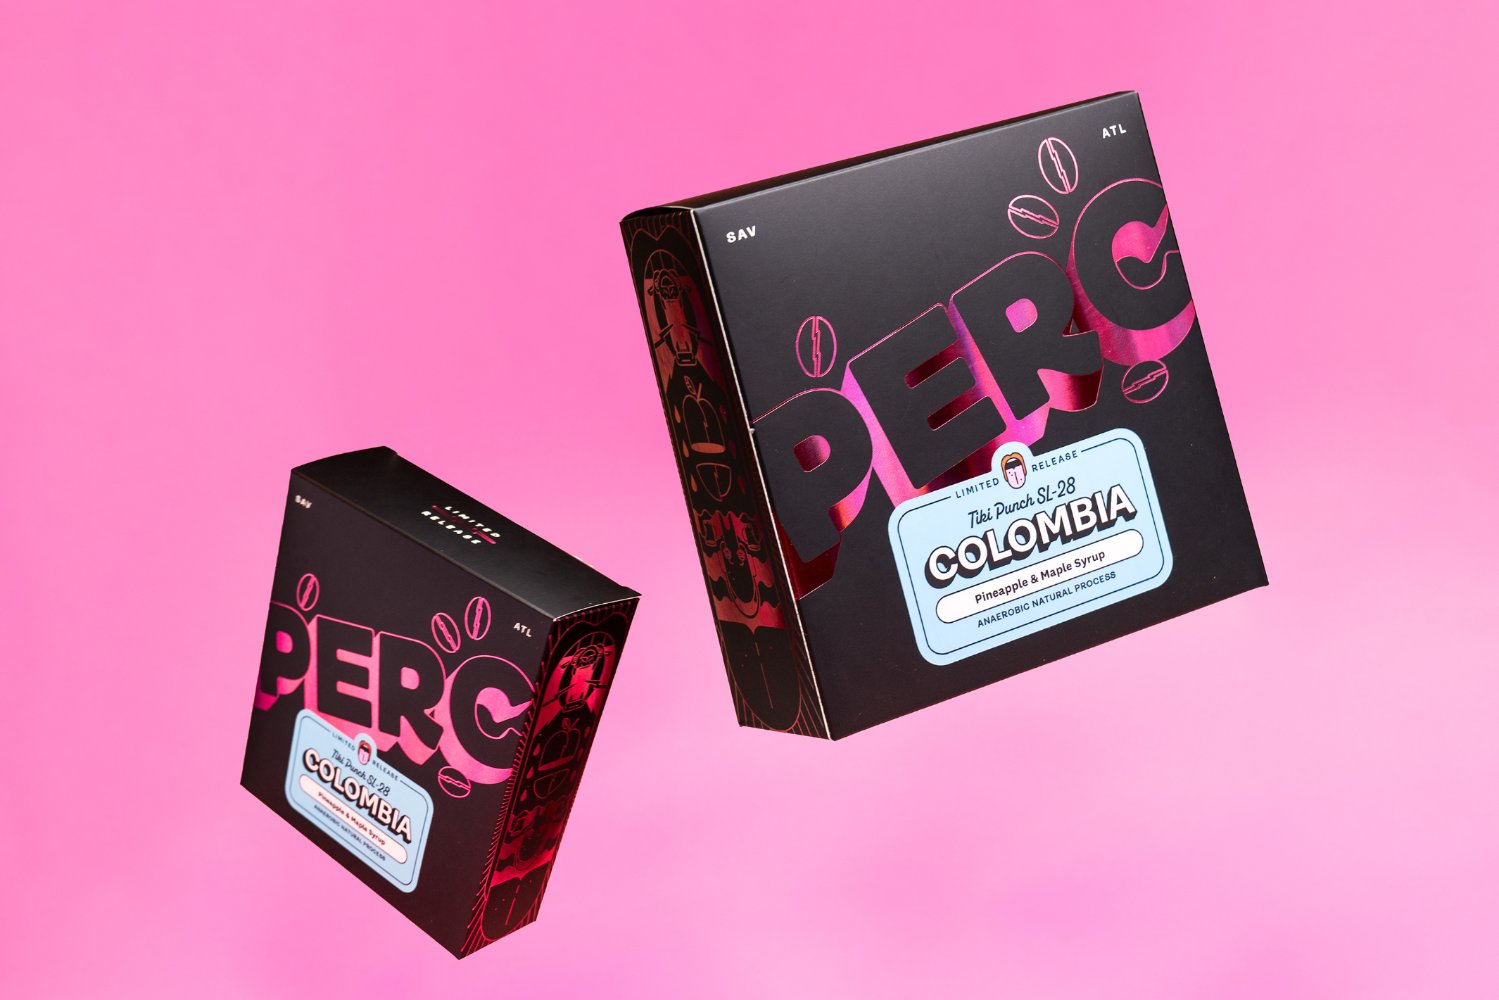 PERC’s Shiny Limited Packaging Captures That Zingy Third Cup of Coffee Feeling